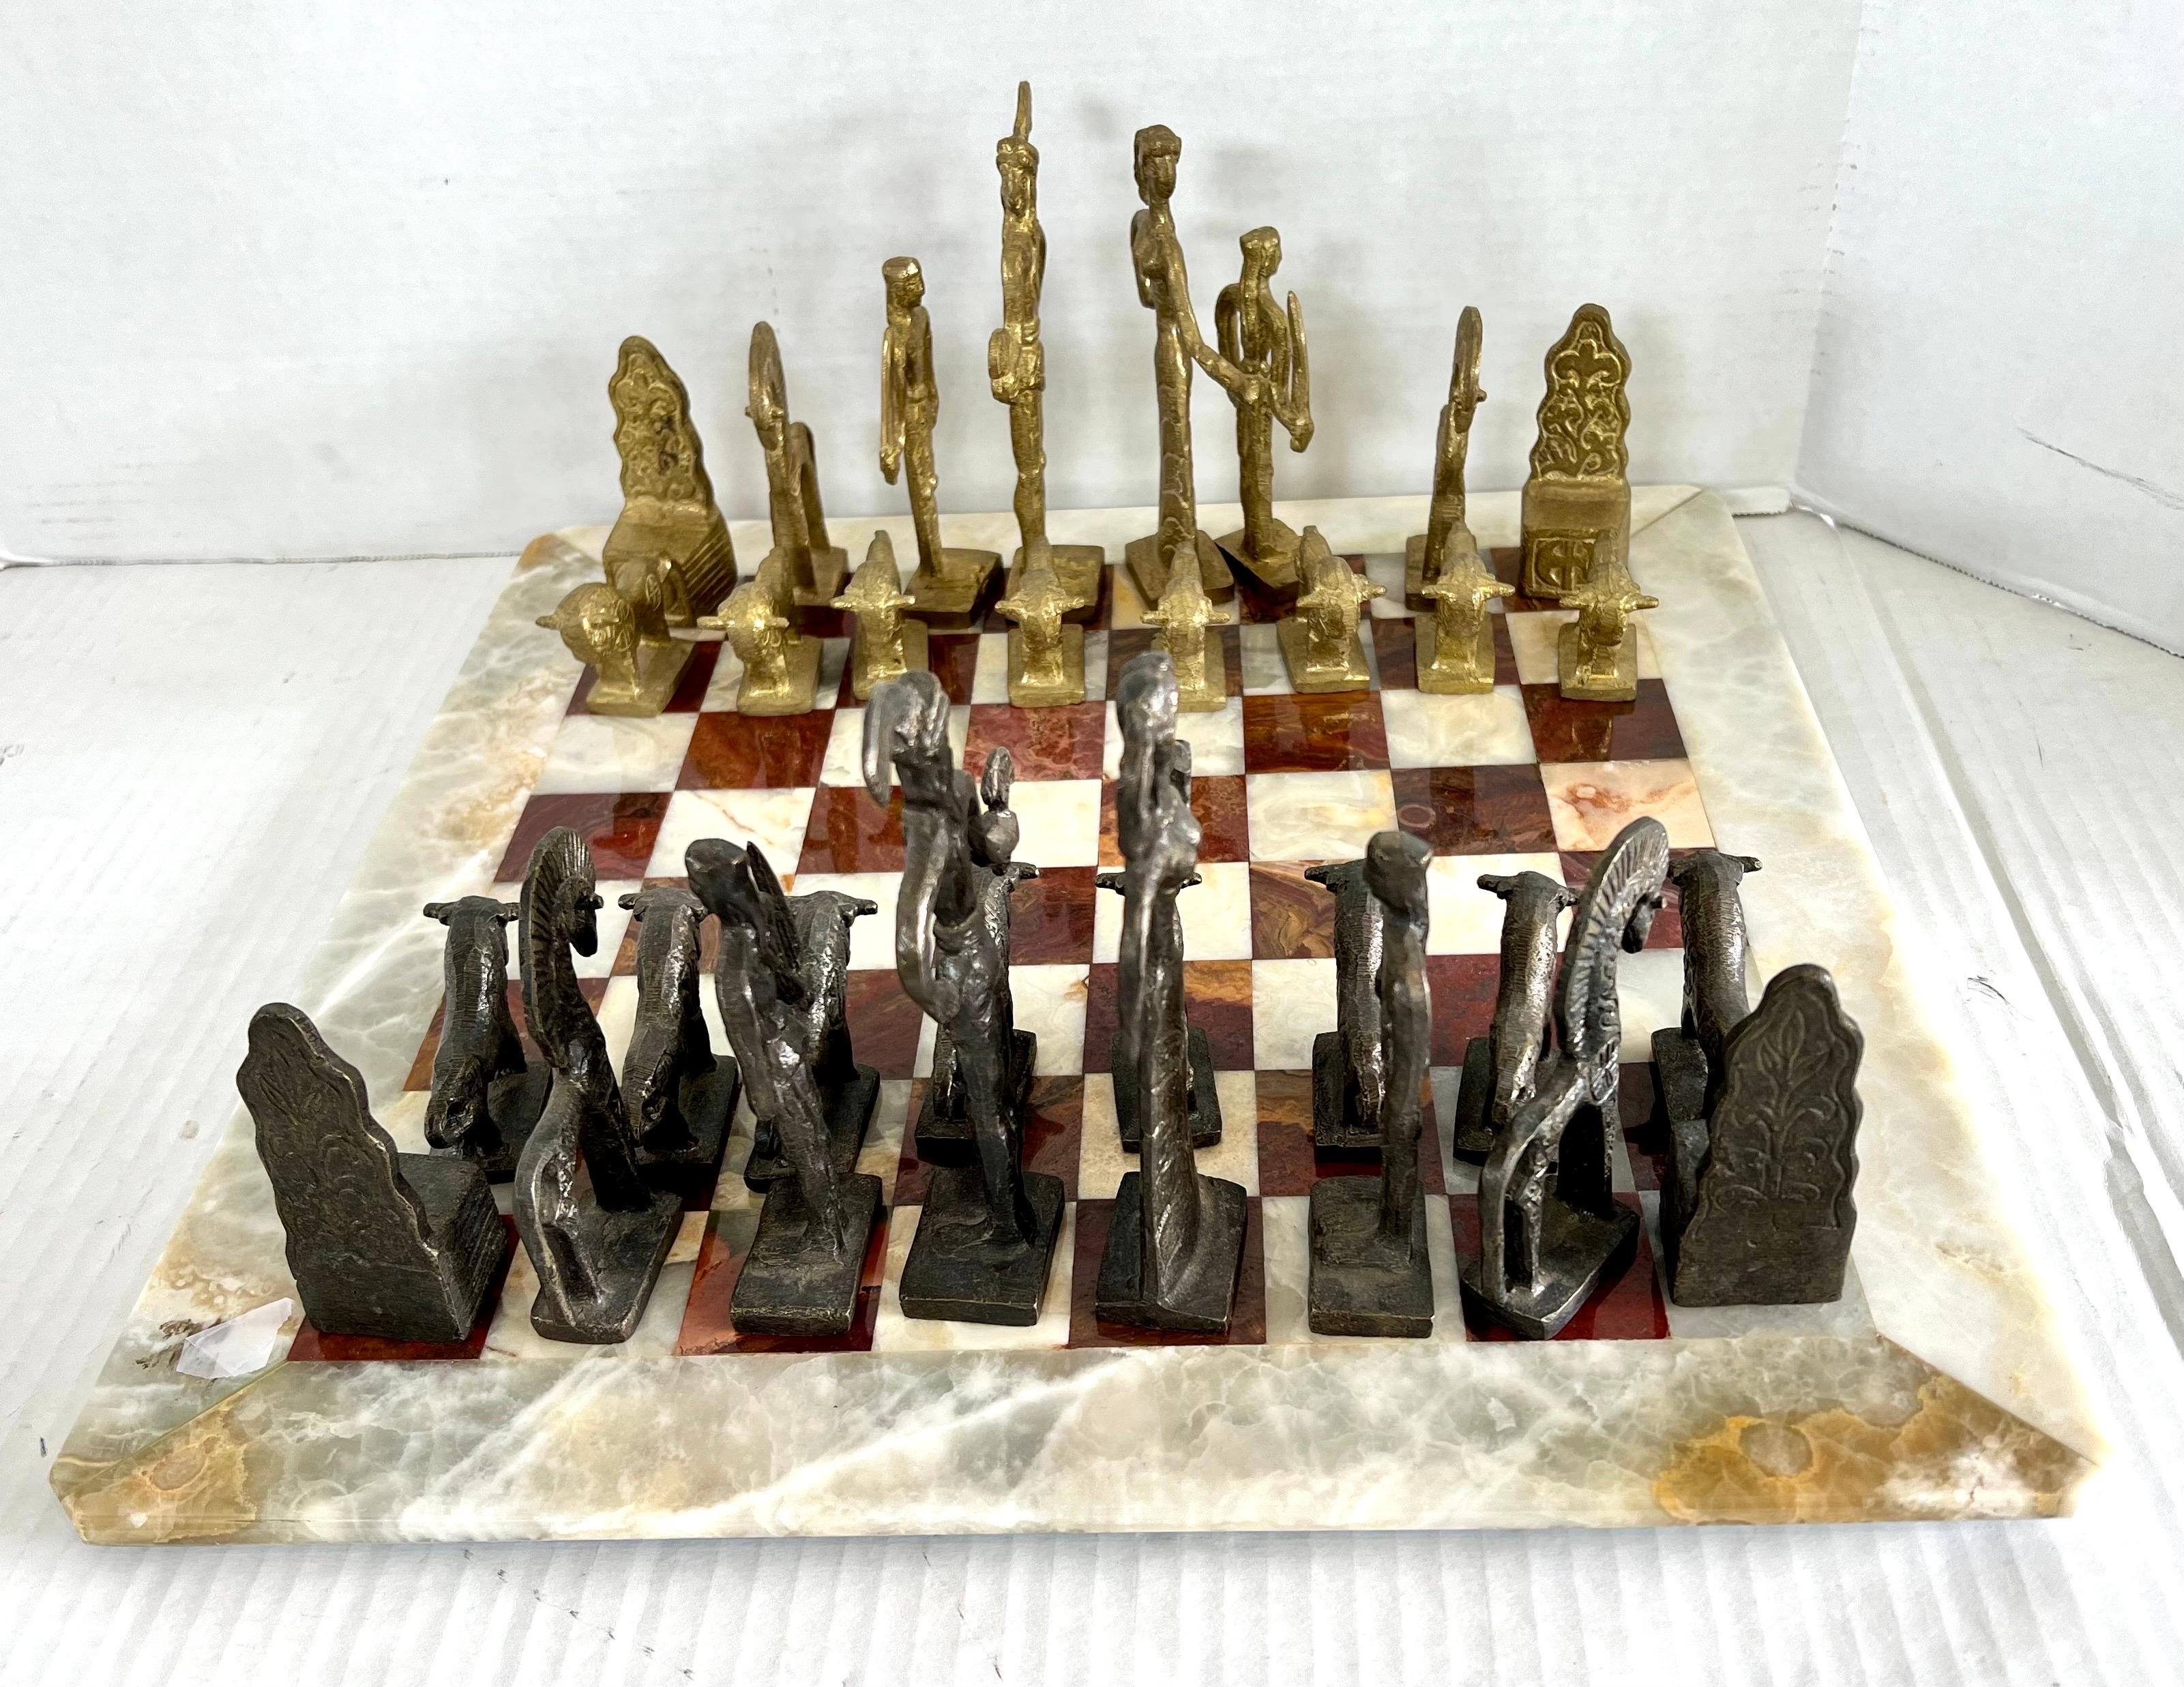 Vintage mid century chess set with marble game board and carved brutalist bronze and brass chess pieces. This set is very heavy and substantial. Measures: Game board is 3/4” thick. Tallest chess piece is 6” tall.